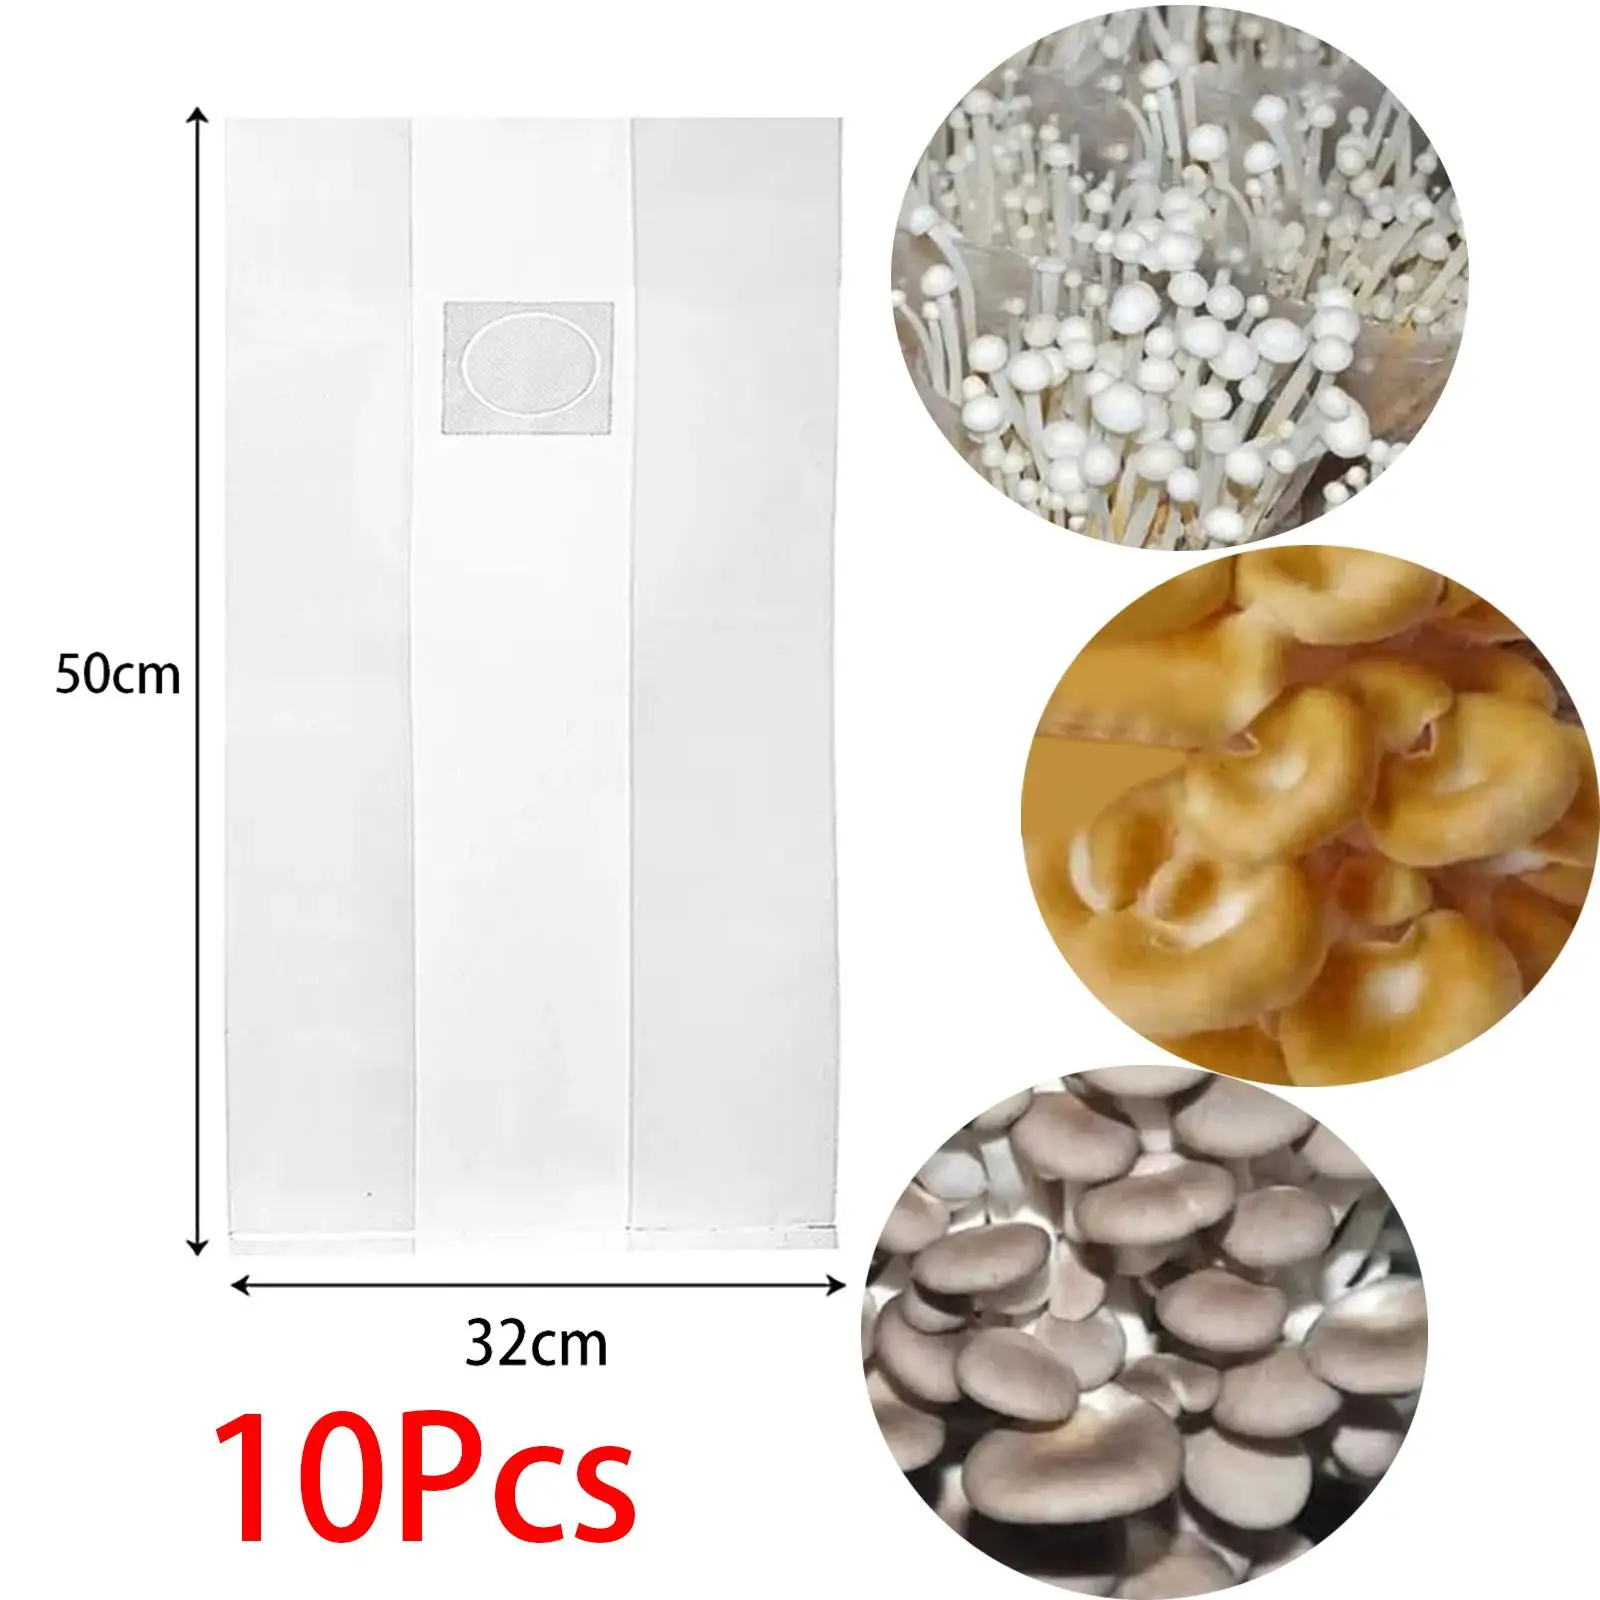 20Pcs Spawns Bags Grow Mushrooms Supplies Tear Resistant Strong Breathable 6 Mils Thick Edible Fungi Growing Bags Autoclave Bags